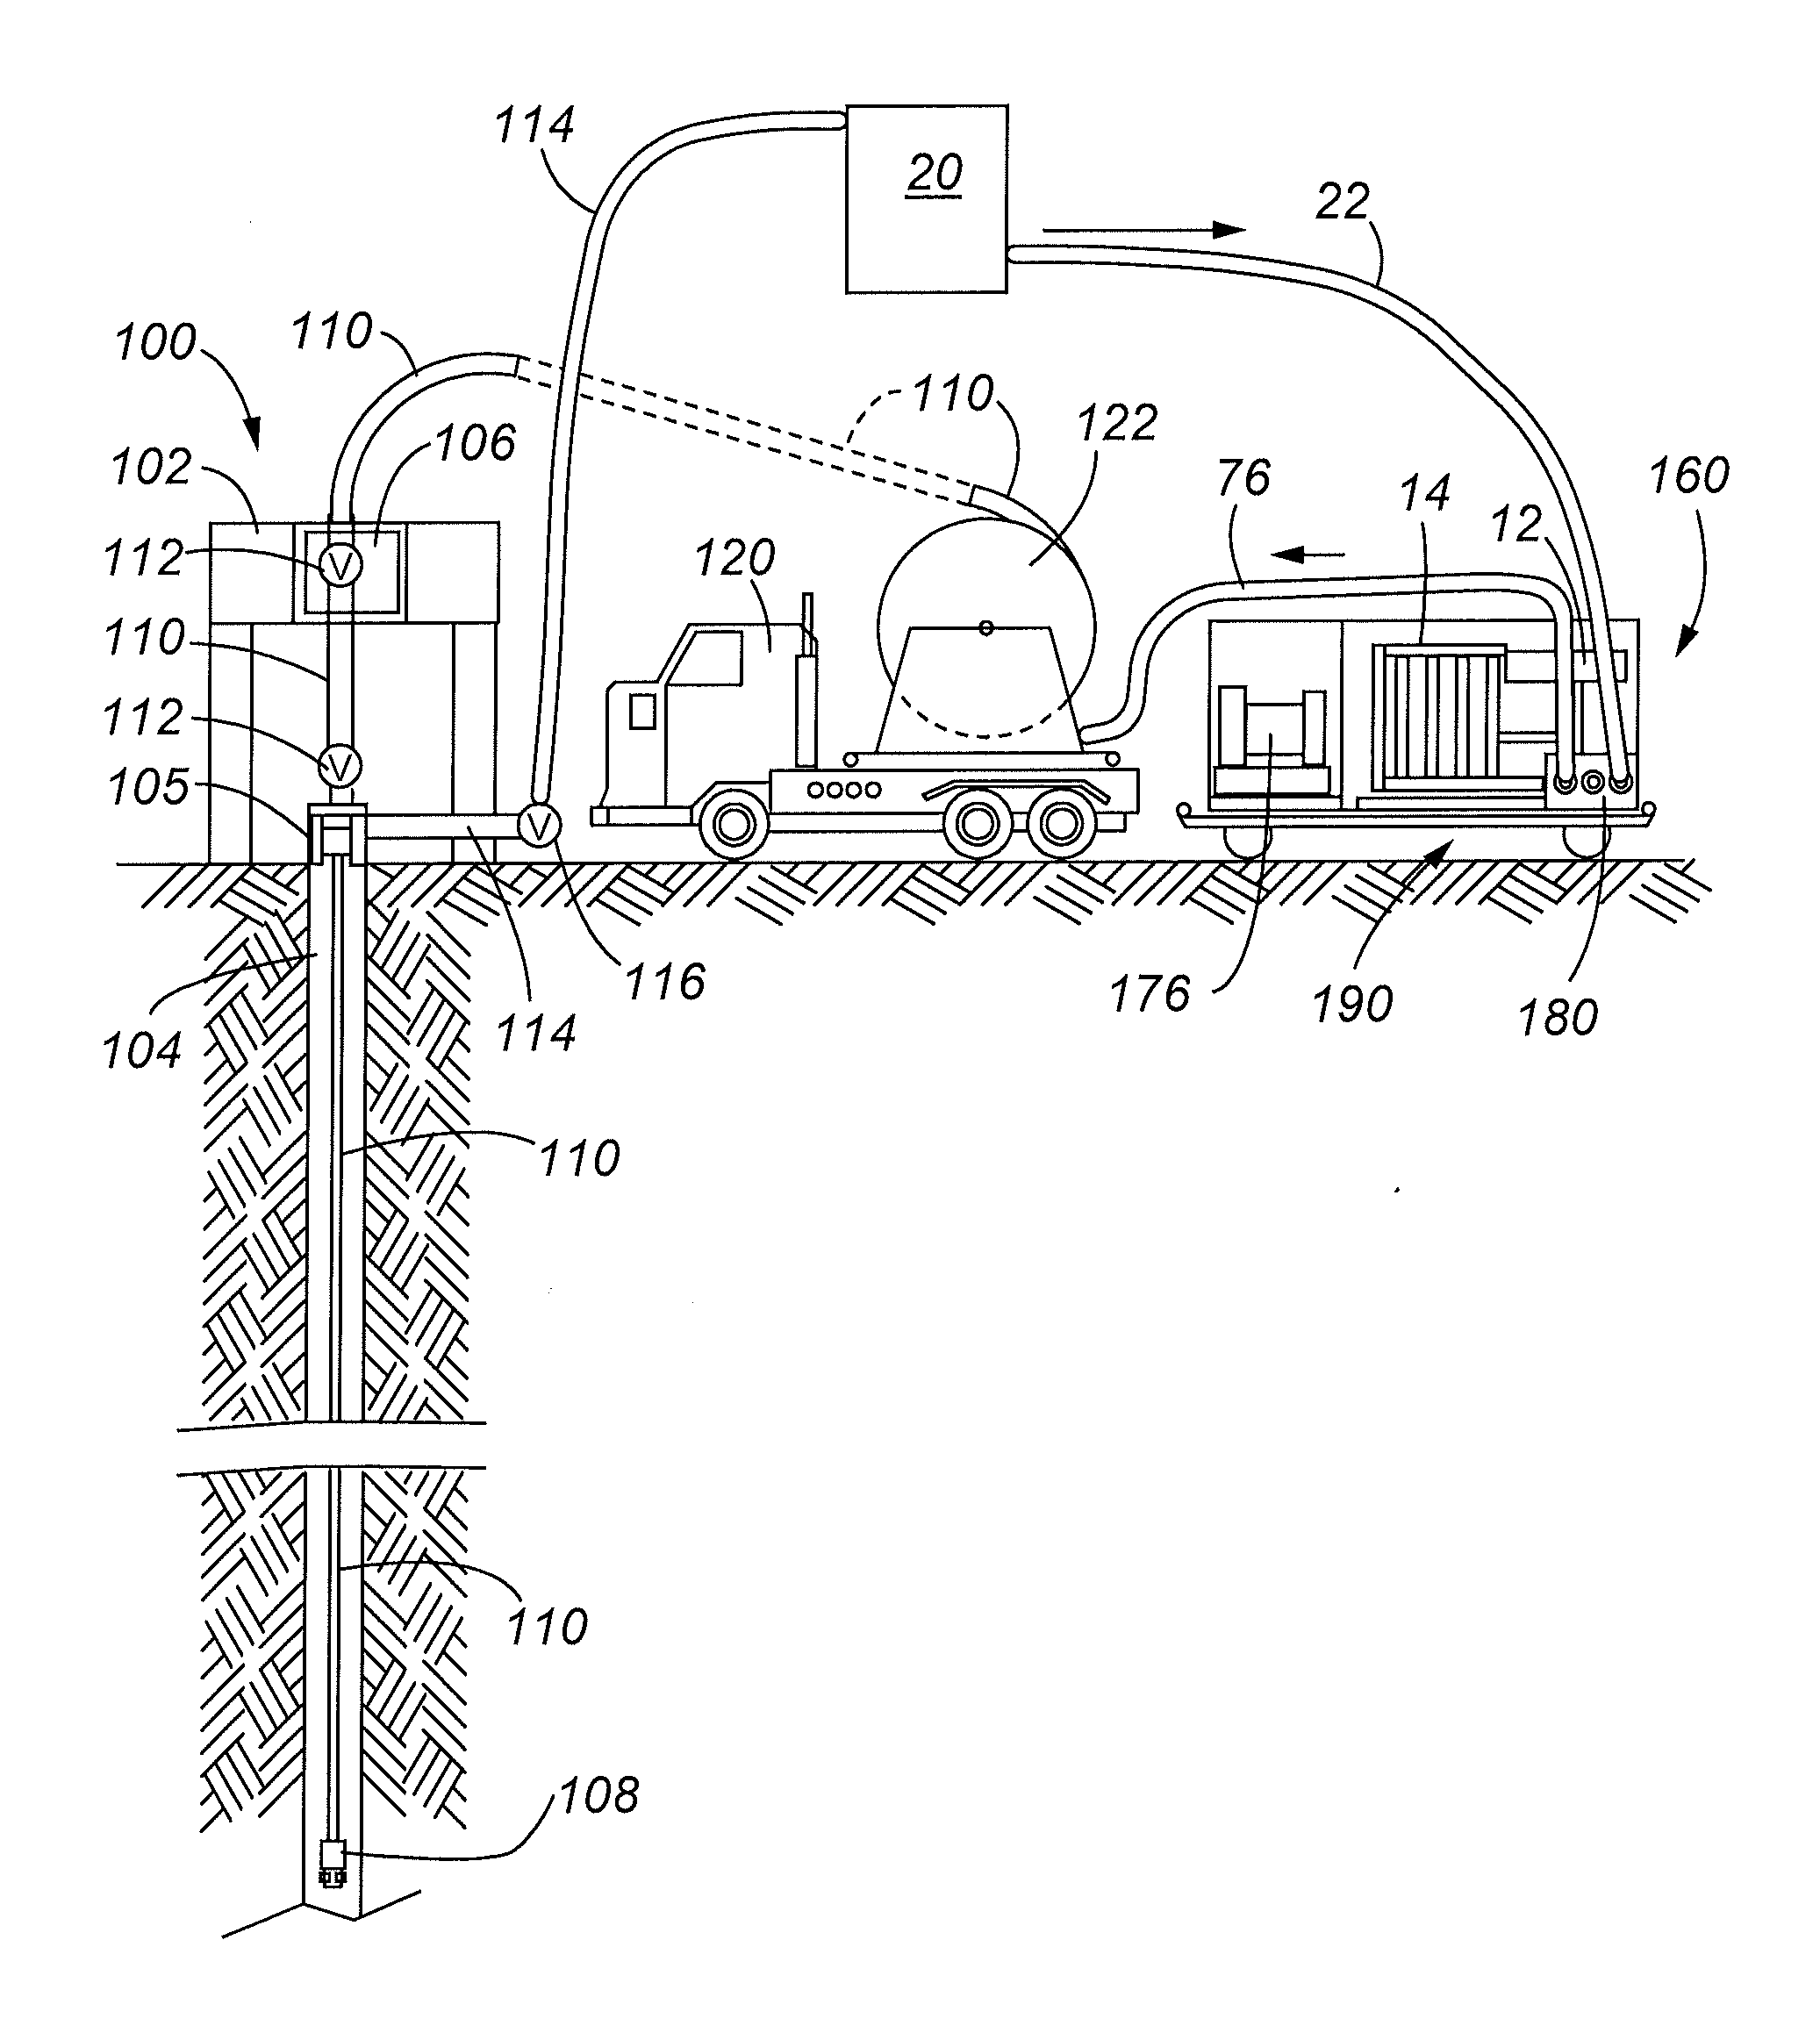 Integrated fluid filtration and recirculation system and method